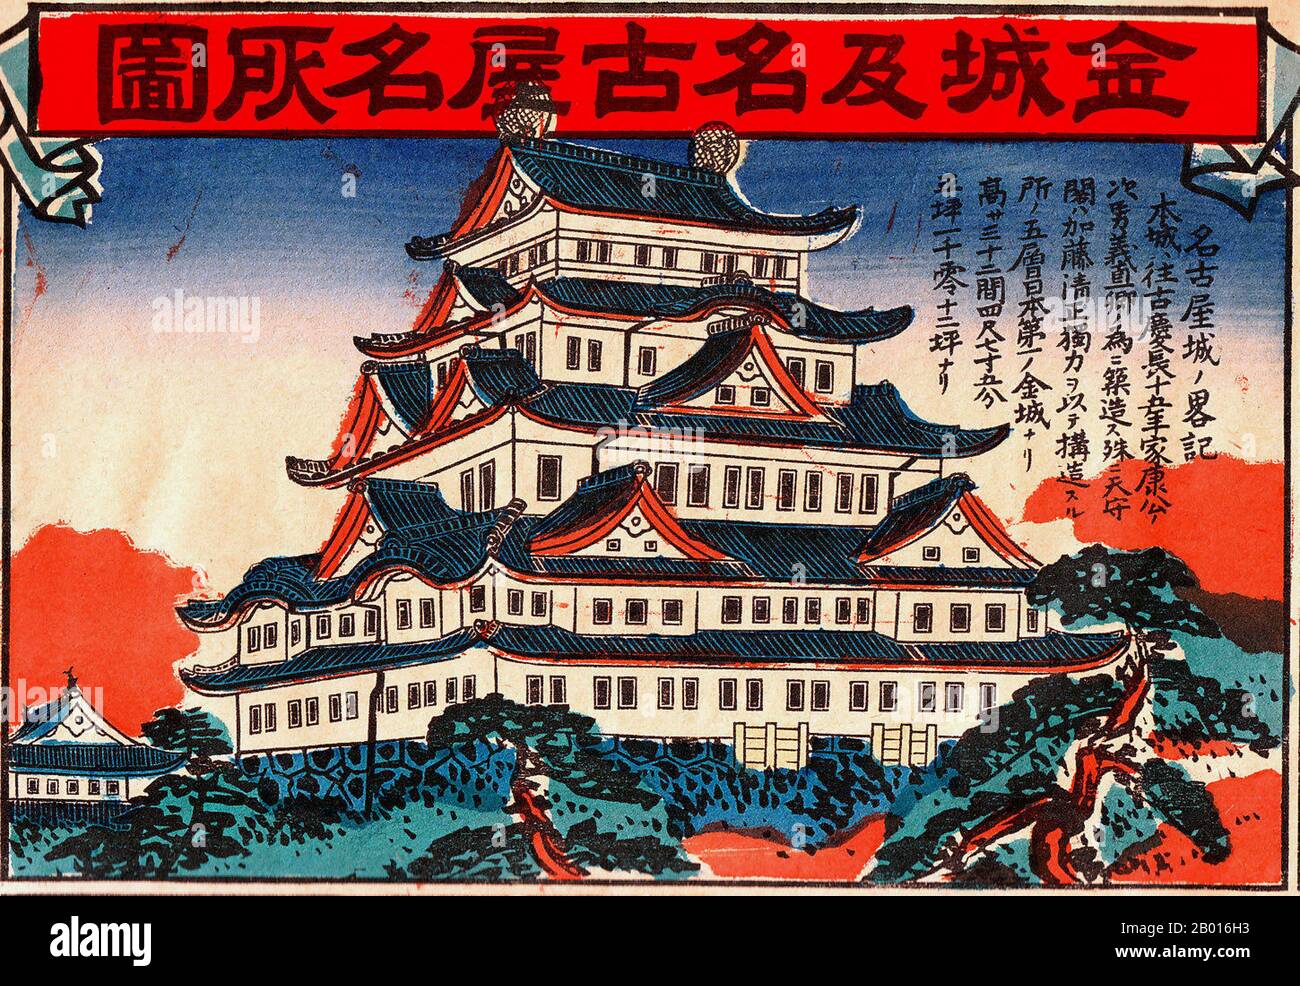 Nagoya Castle (Nagoya-jō) is a castle located in Nagoya, central Japan. During the Edo period, Nagoya Castle was the centre of one of the most powerful castle towns in Japan—Nagoya-juku— and it included the most important stops along the Minoji, which linked the Tōkaidō with the Nakasendō. Stock Photo